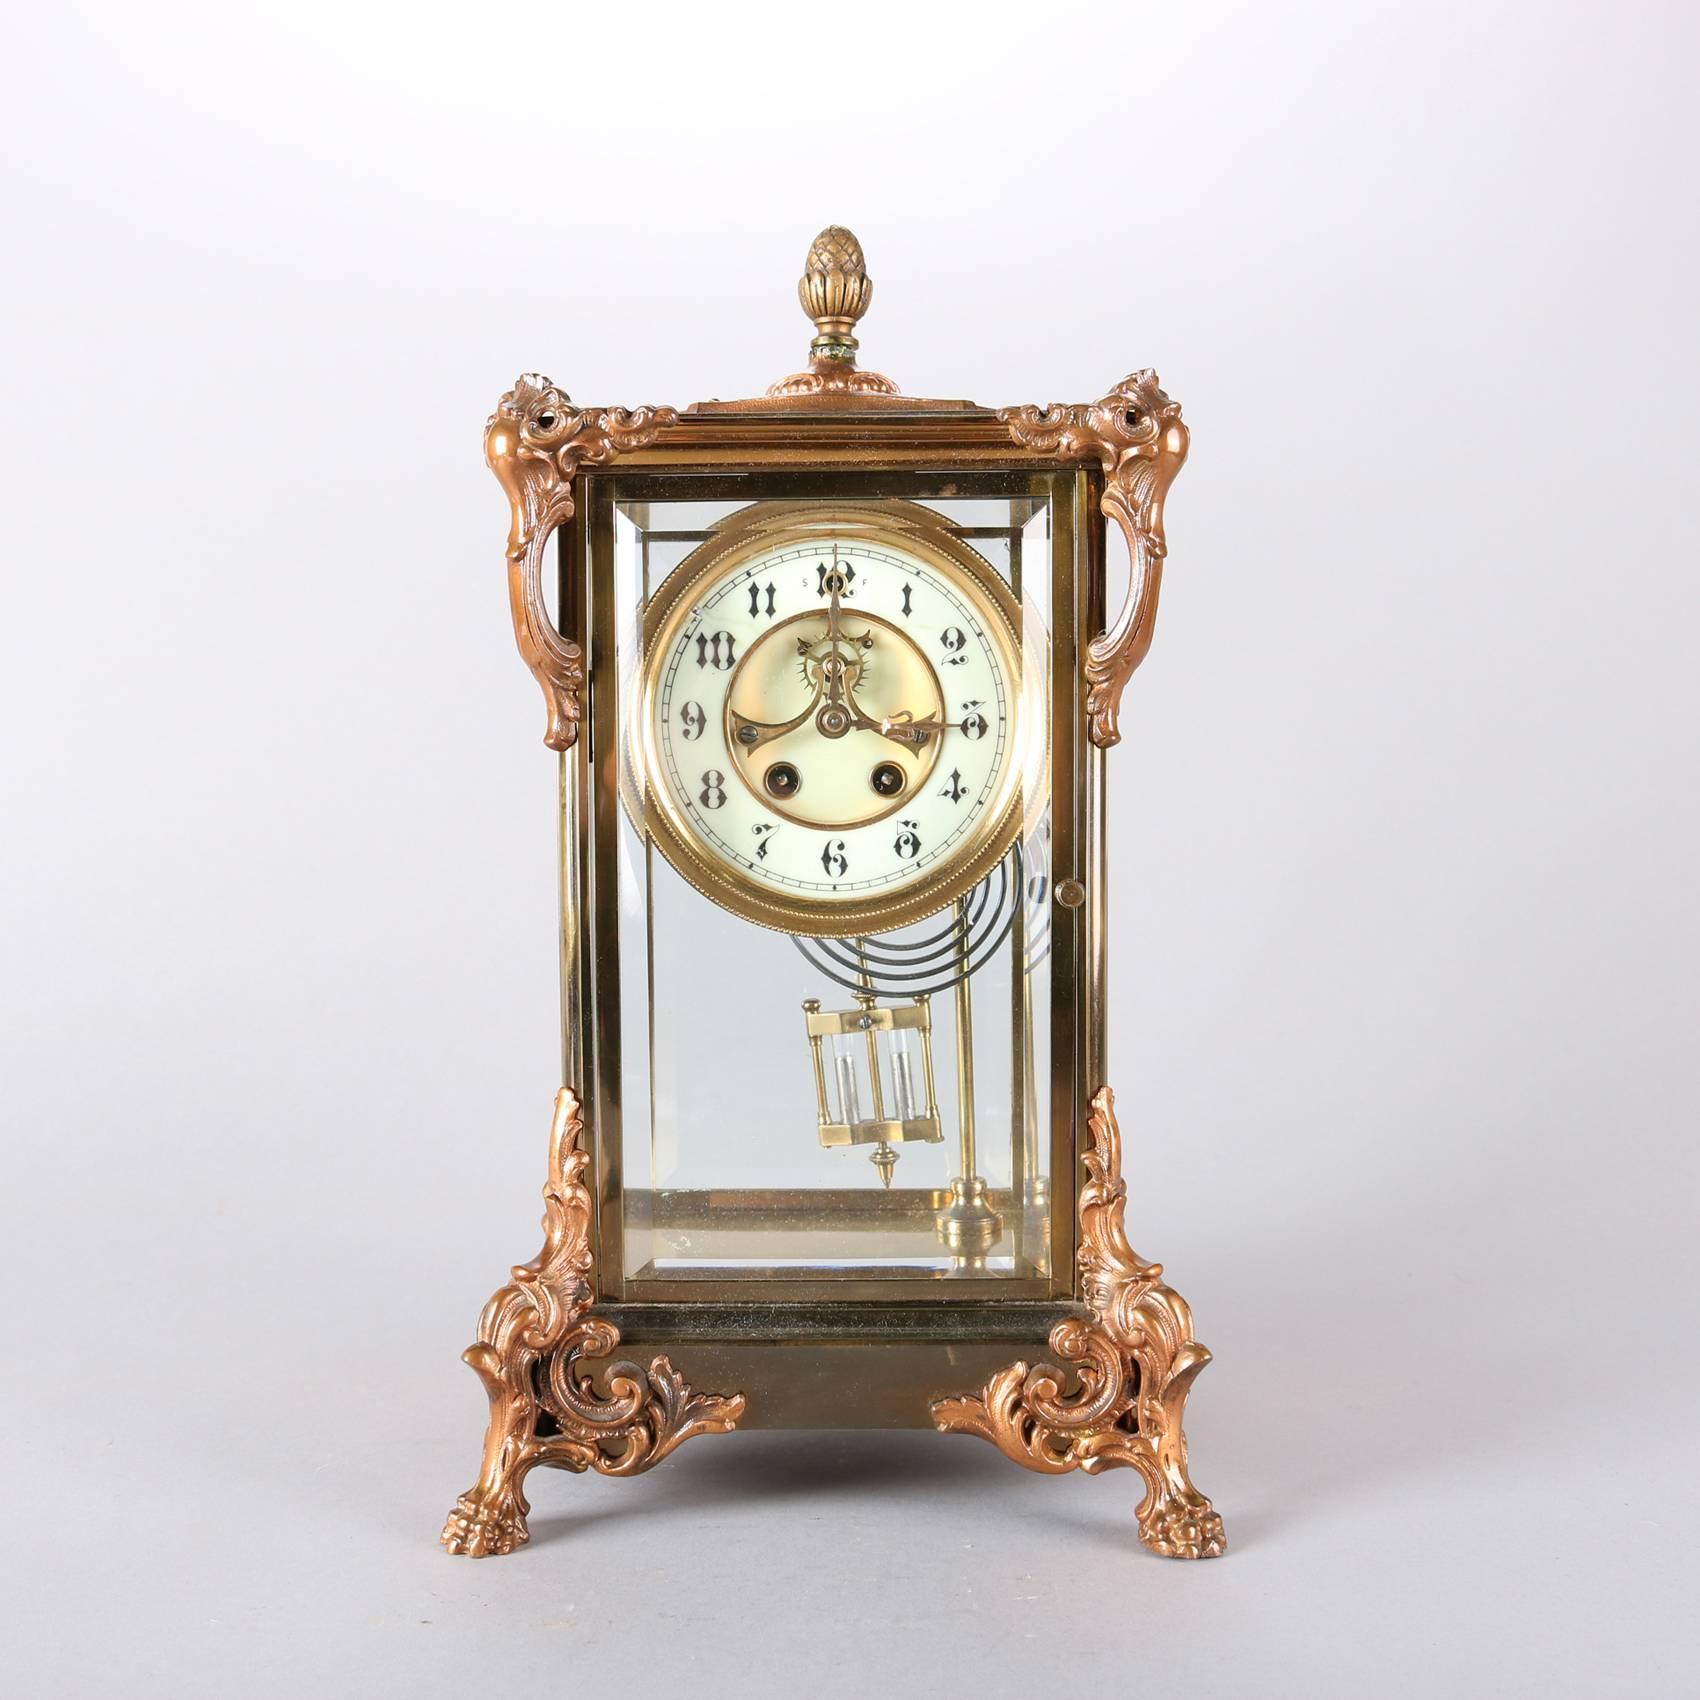 Antique French style crystal regulator mantel clock by Gilbert Clock Co. features gilt bronze paw and foliate form attachments, glass panels, the enameled dial with open escapement and Arabic numerals, 19th century

Measures: 15